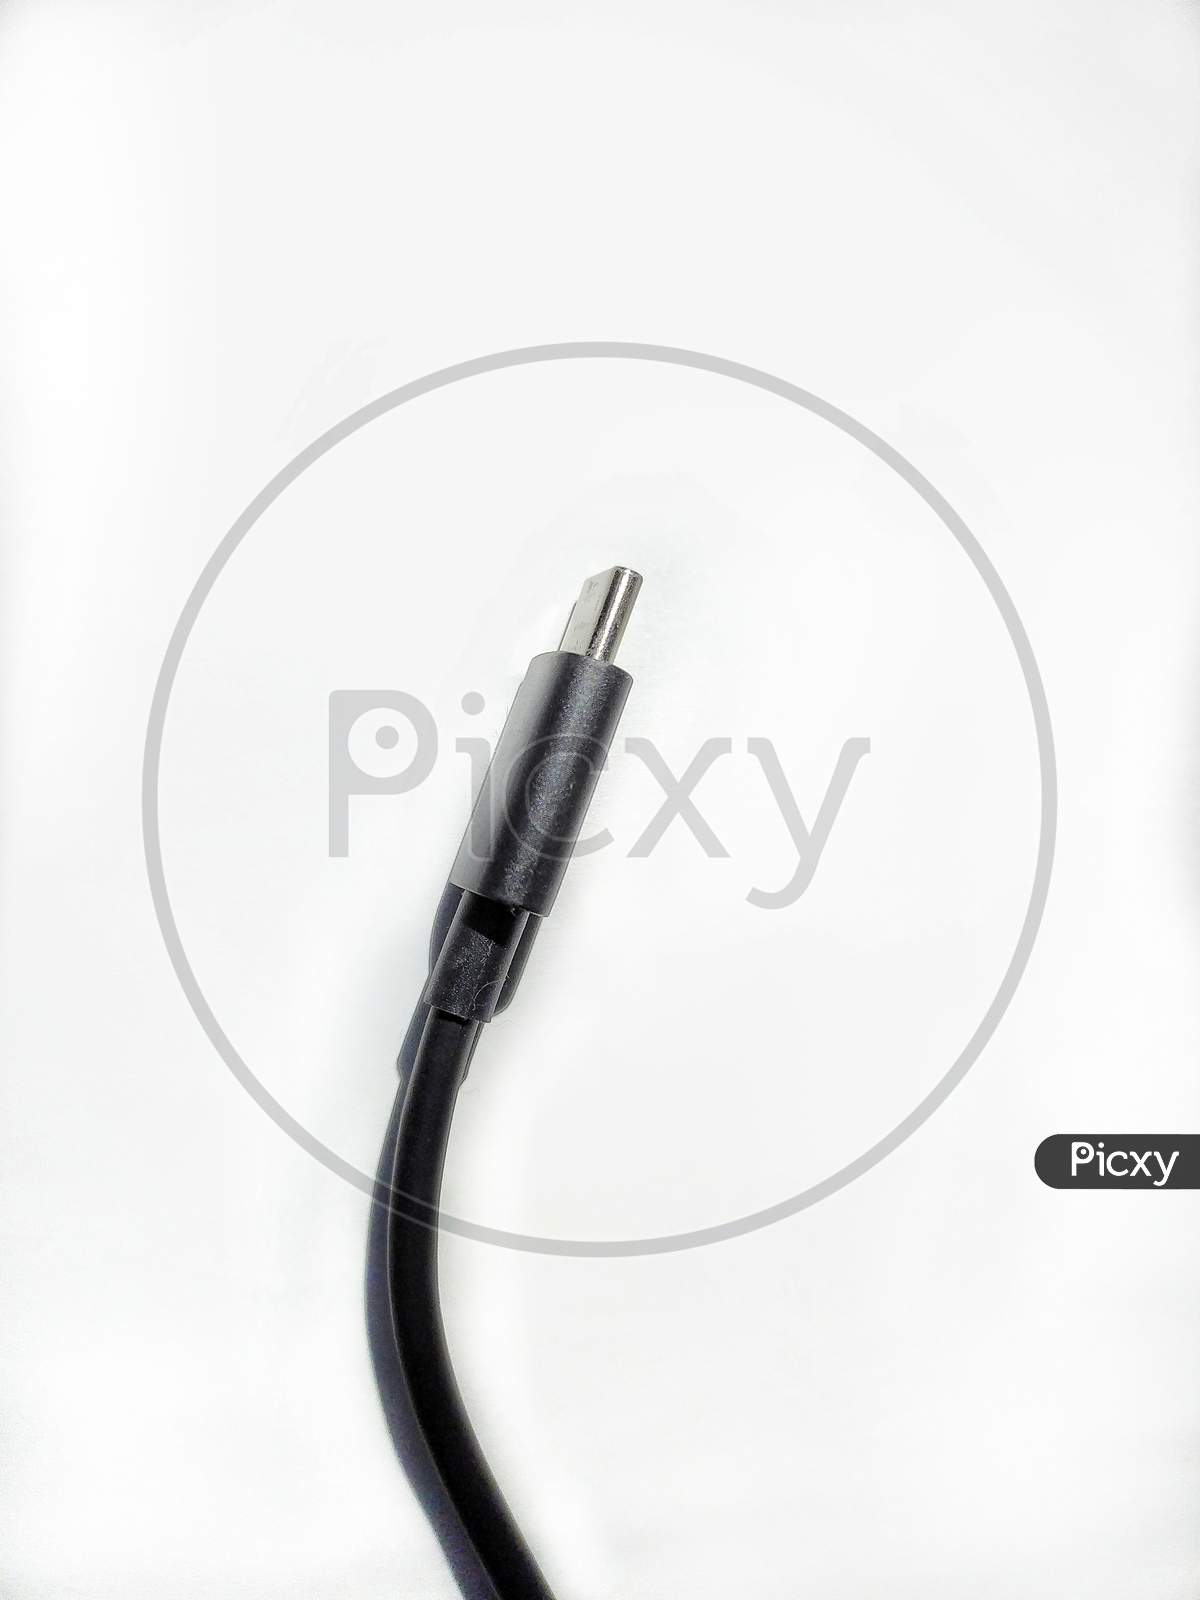 Usb C Cable,White Background